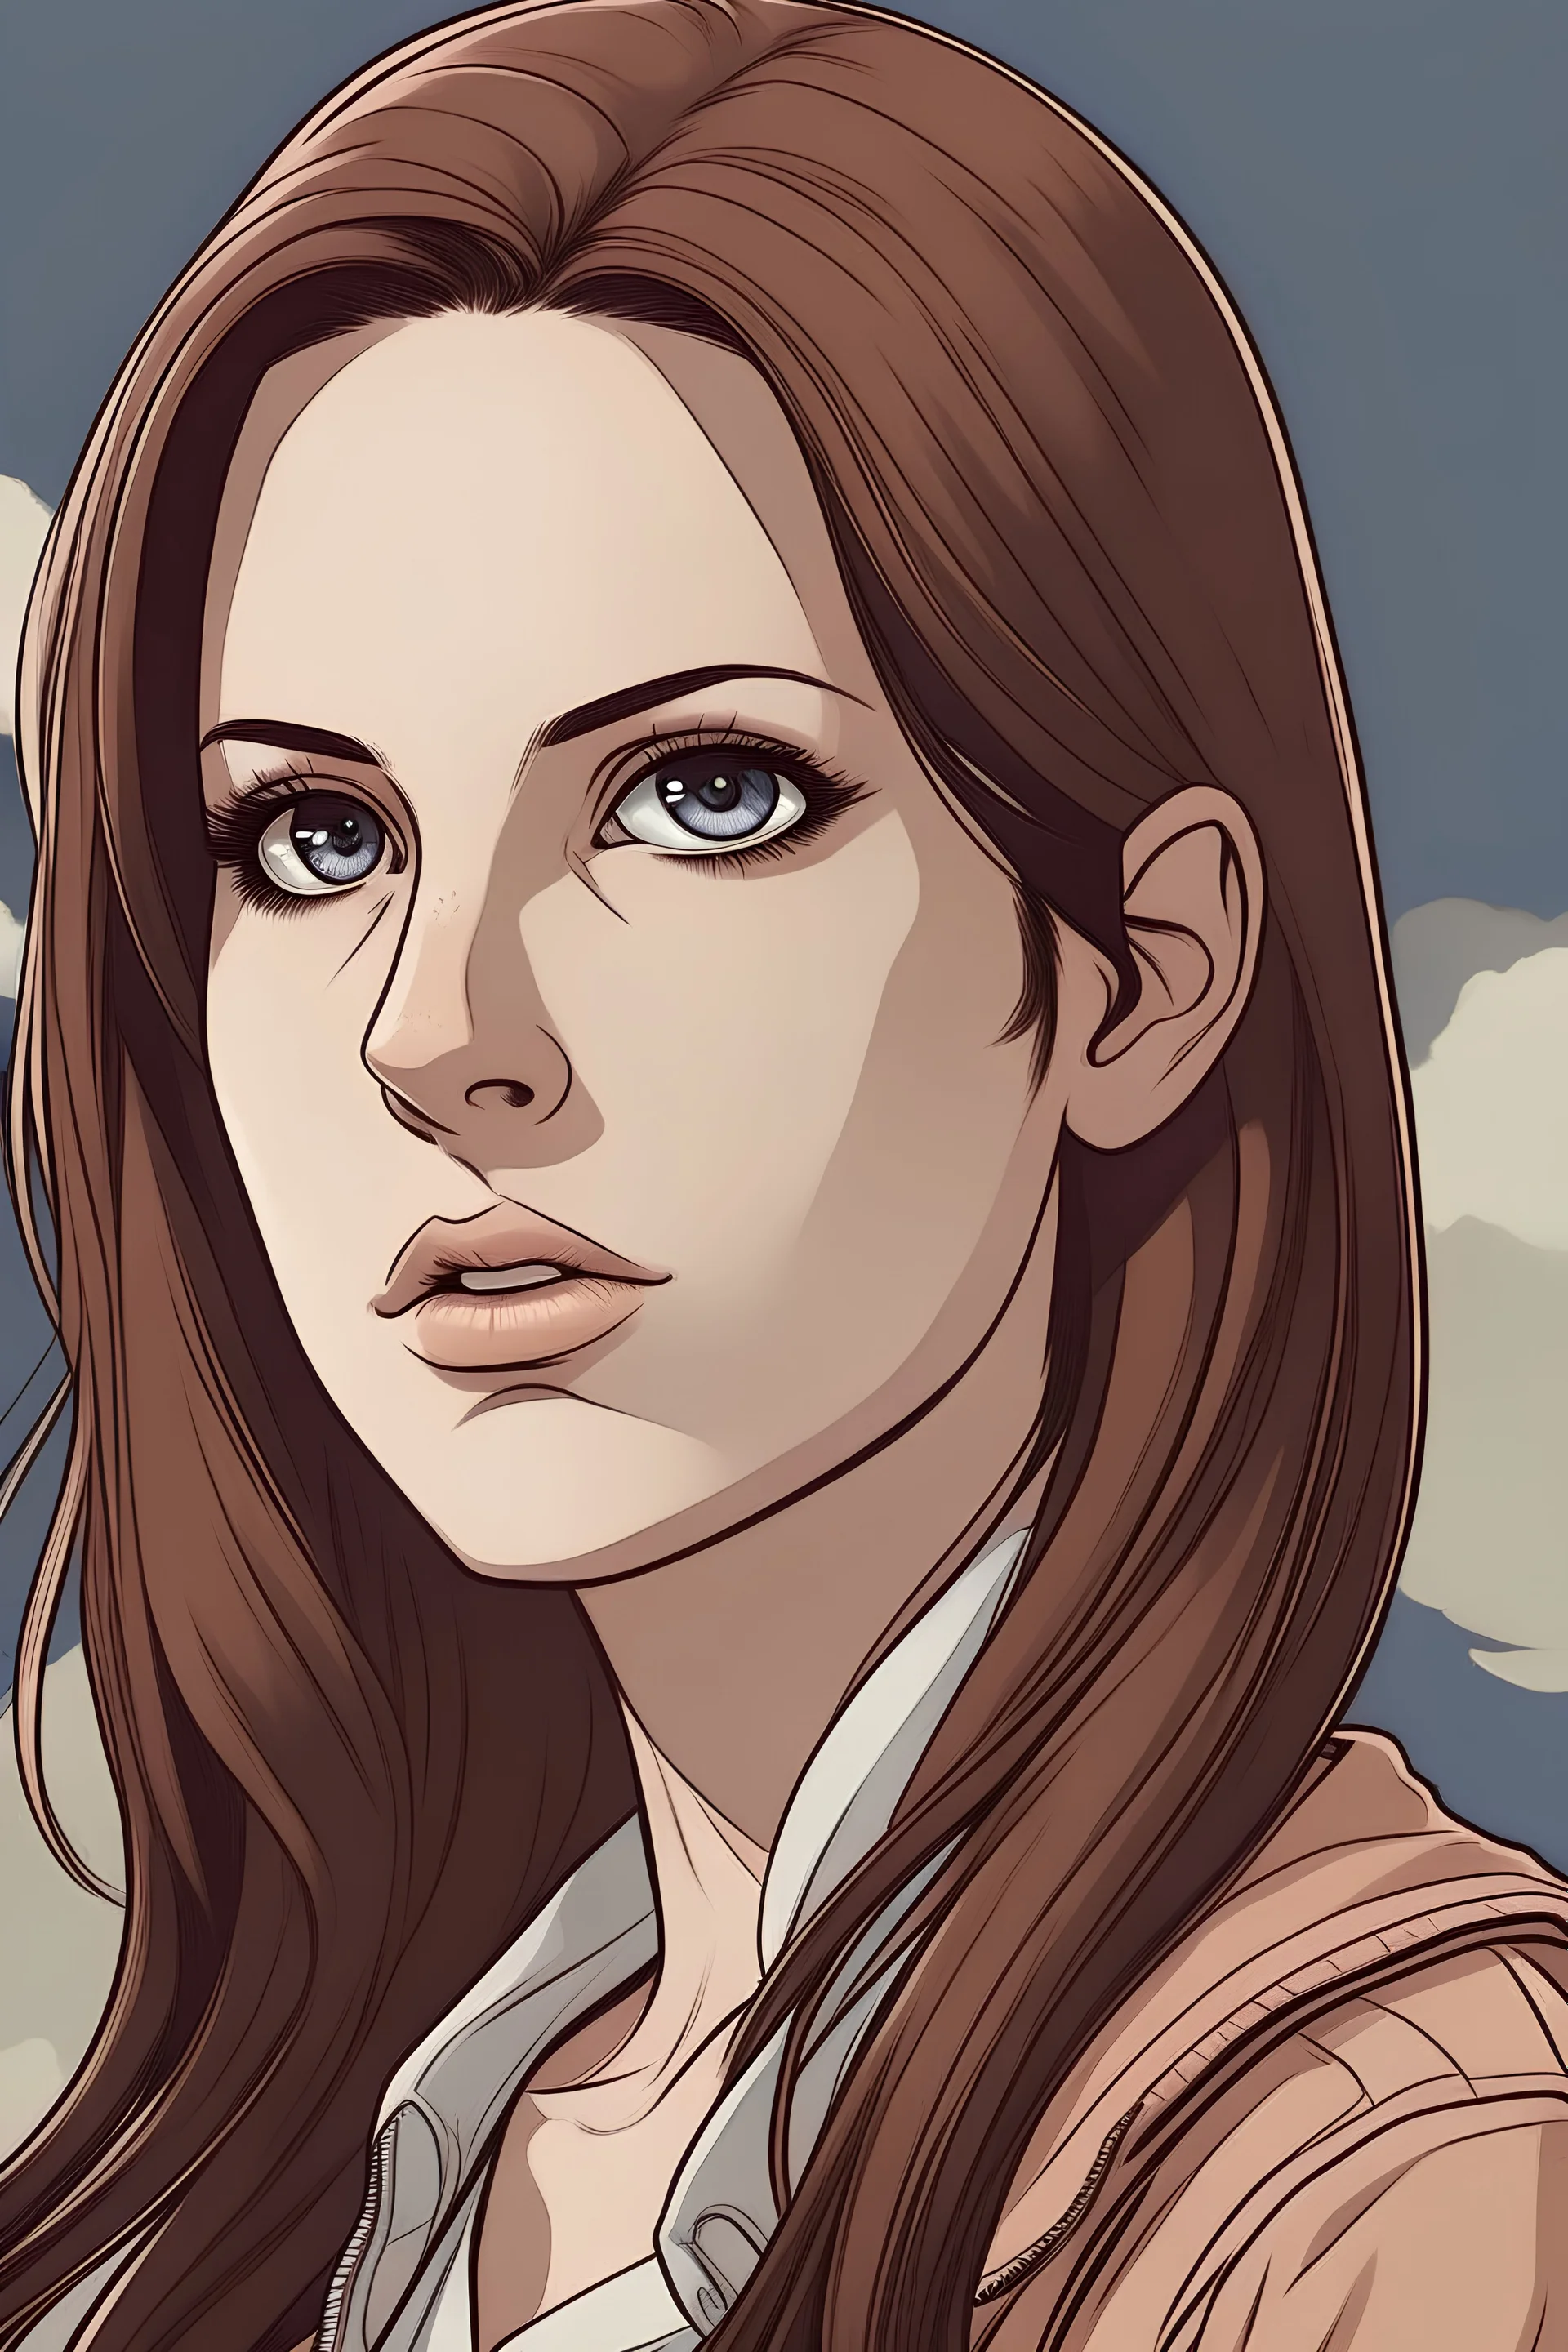 Draw lana del rey with attack on titan art style anime